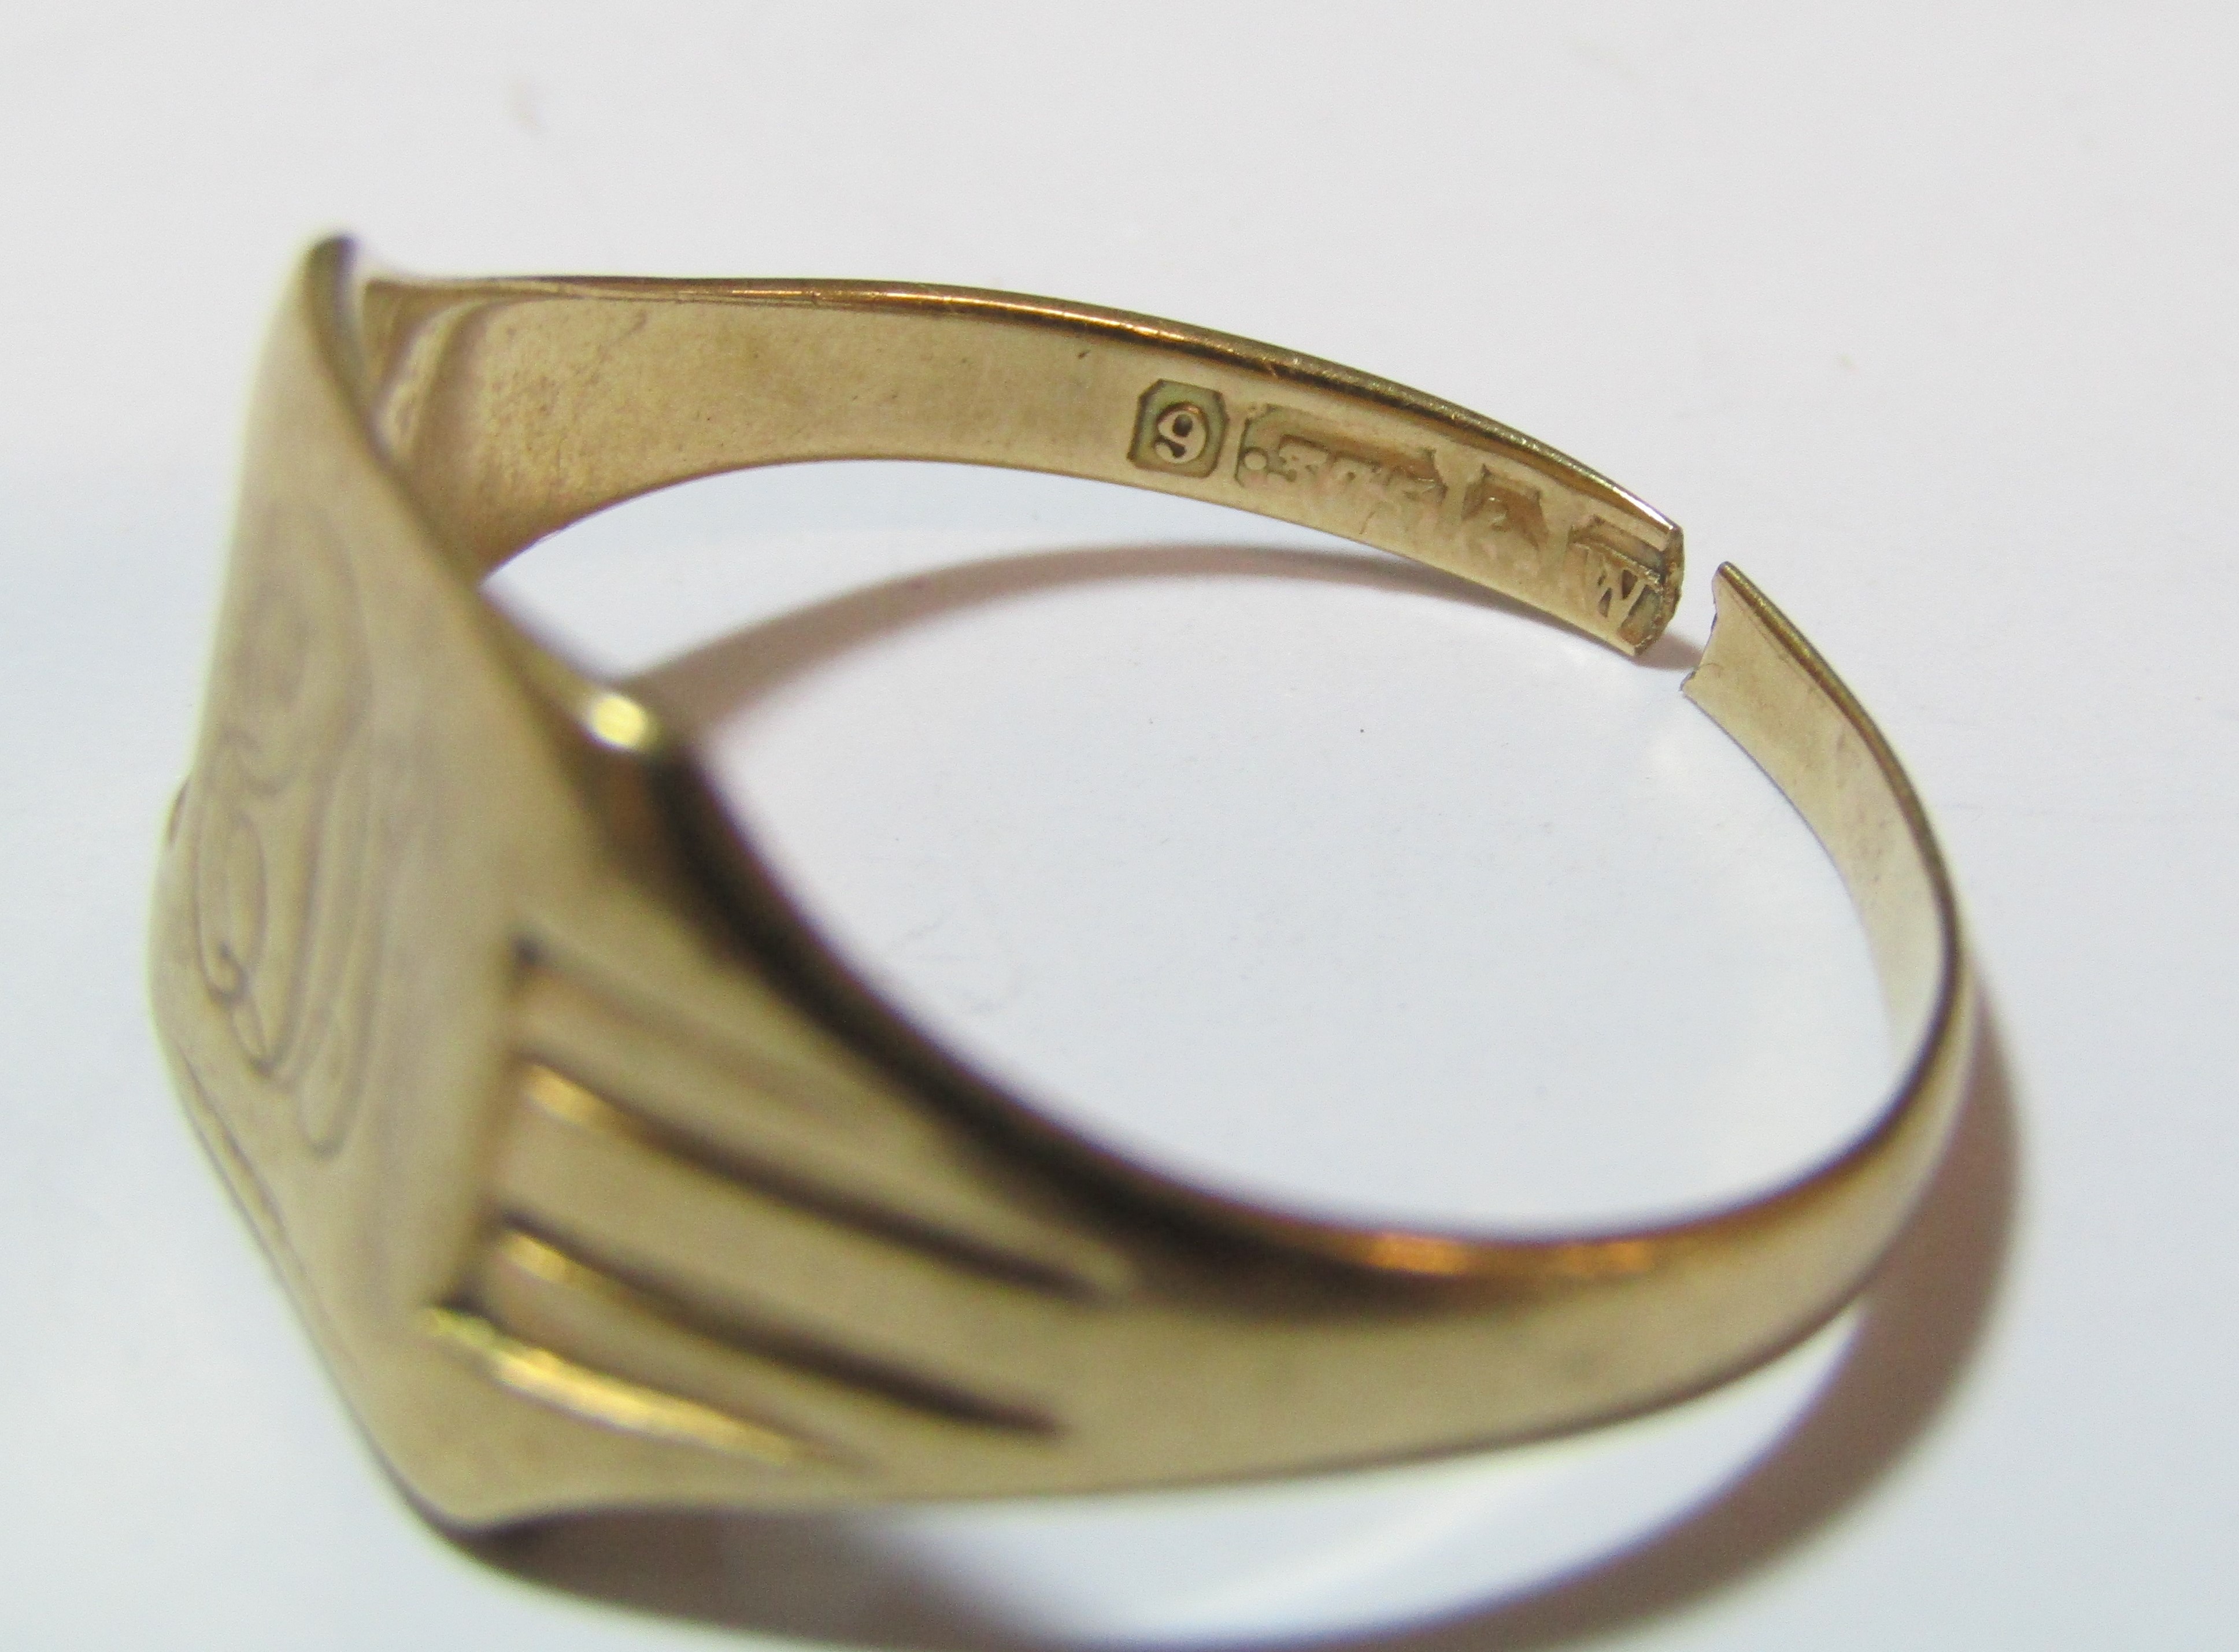 3 rings - 9ct gold signet ring engraved 'EDH' ((broken), ring size Q 2.3g - tested as 9ct with cubic - Image 14 of 14